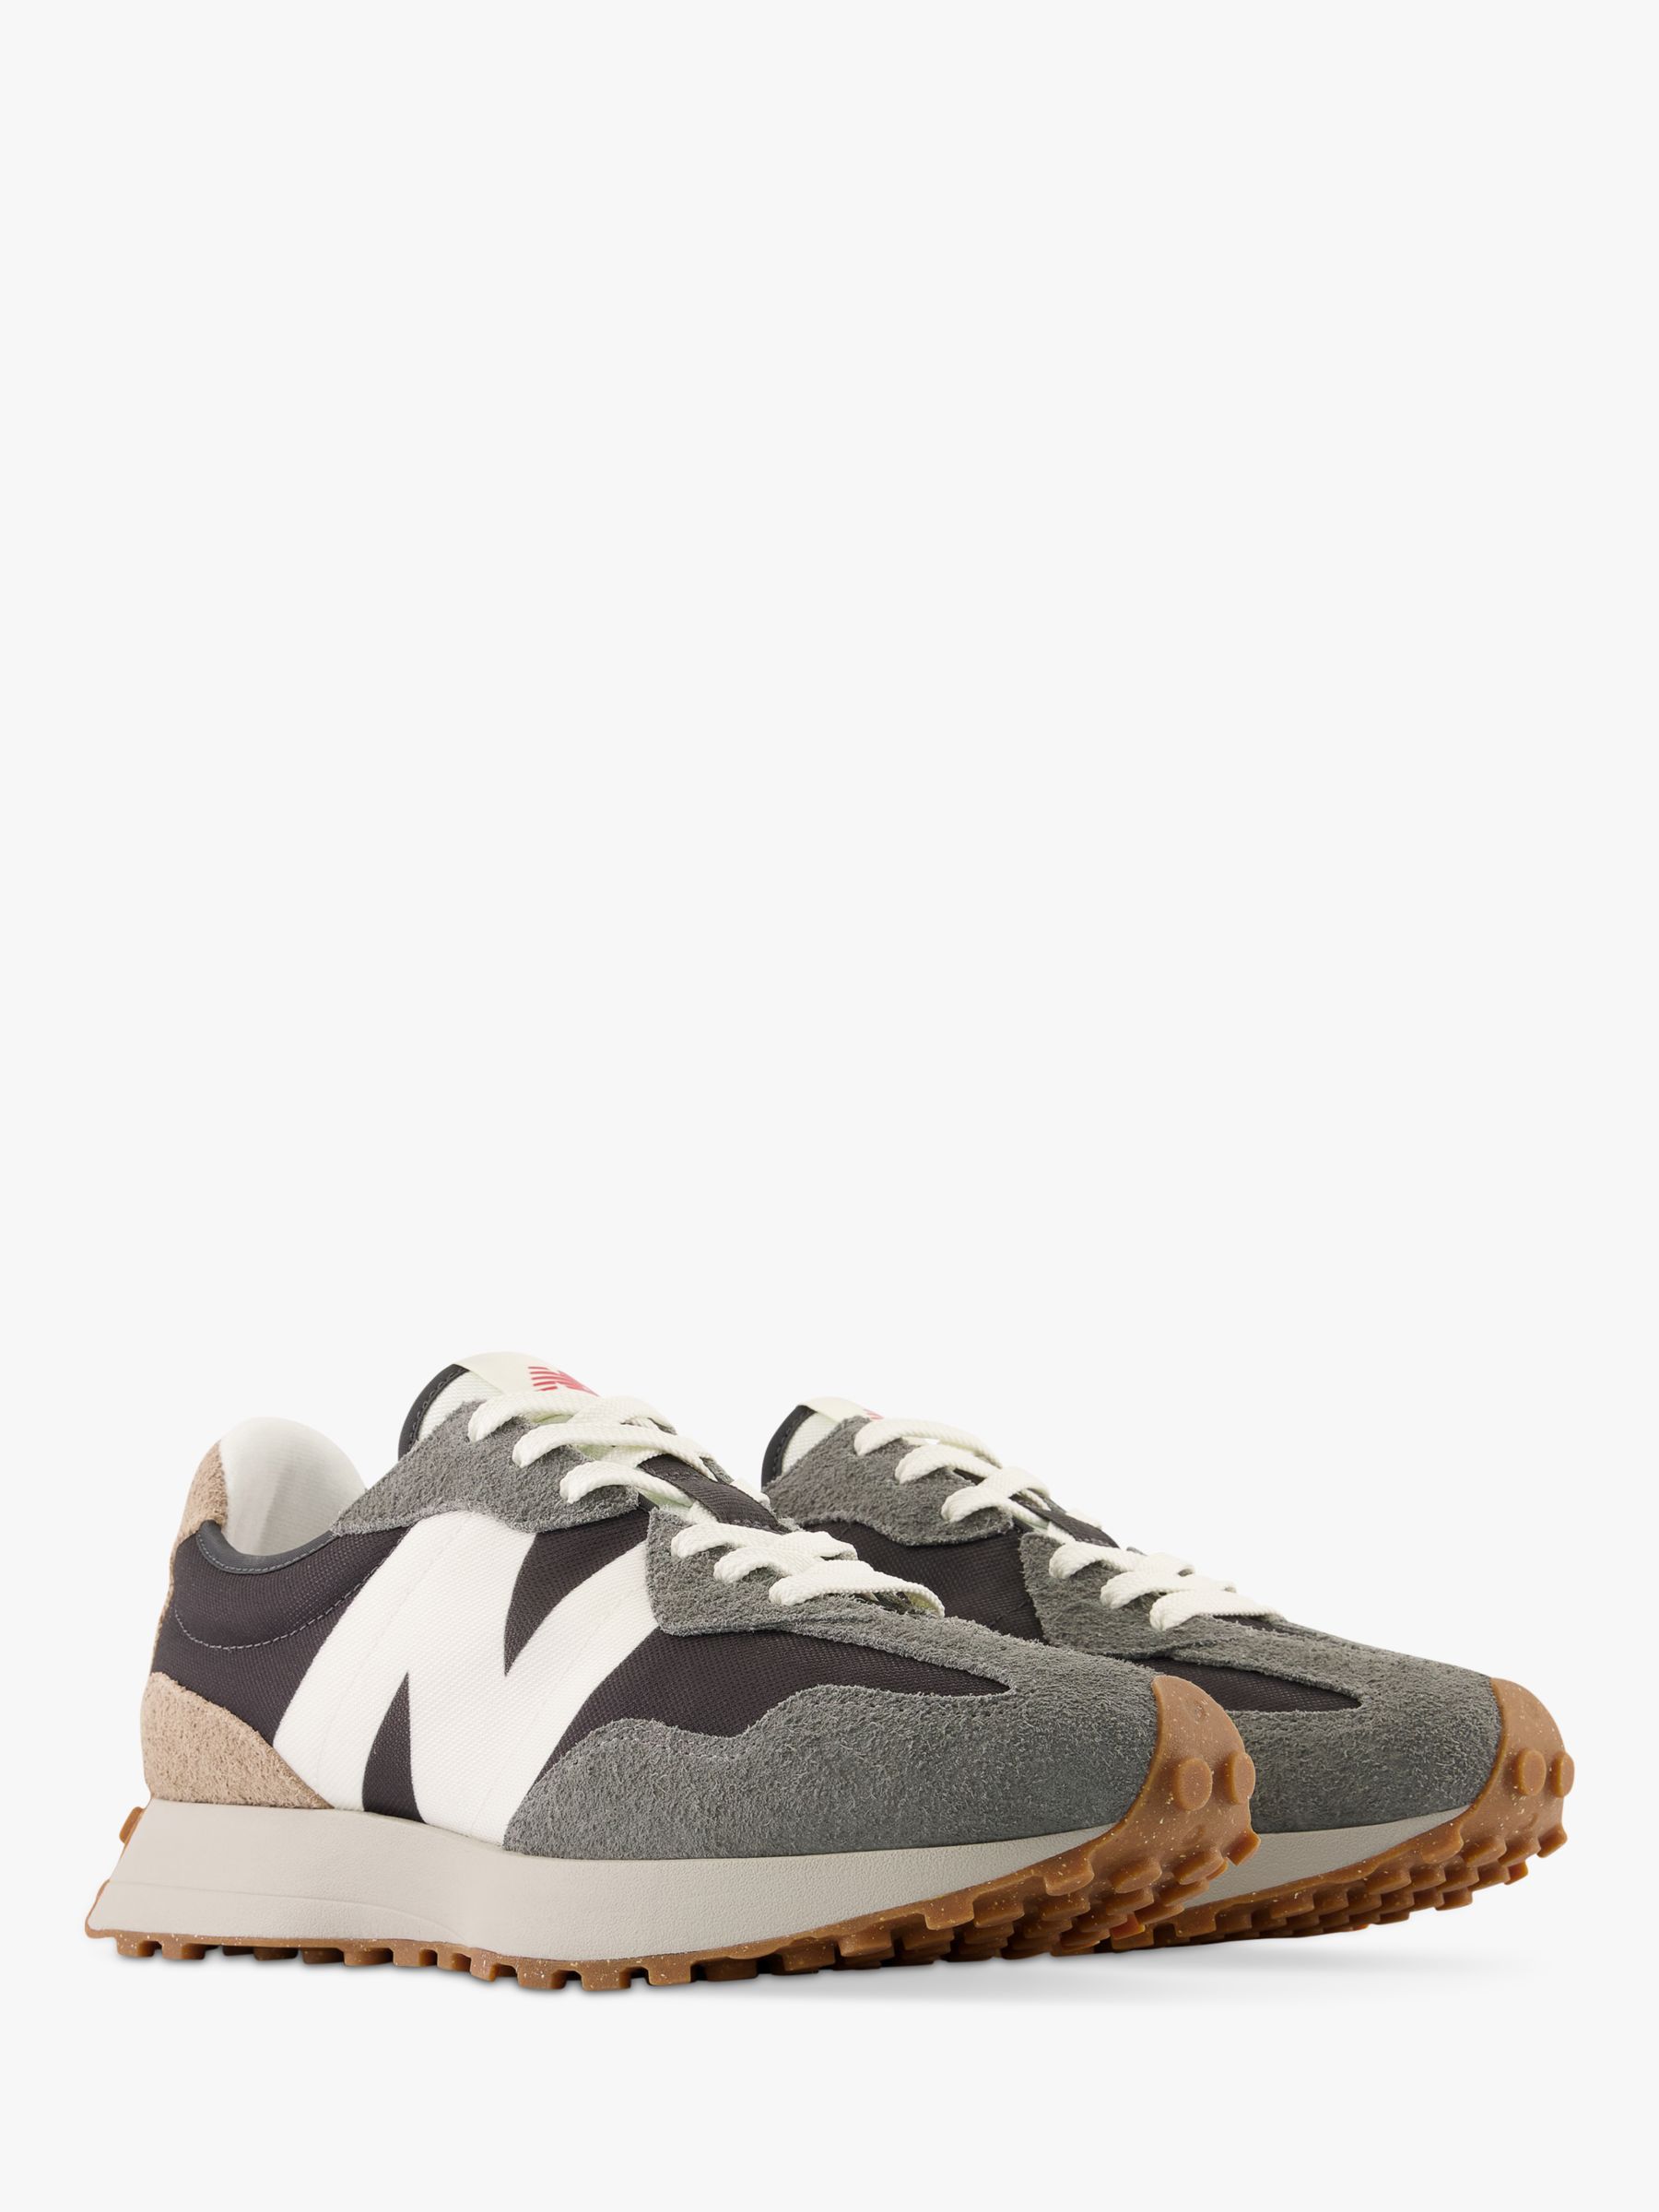 Buy New Balance 327 Retro Suede Trainers, Harbour Grey Online at johnlewis.com